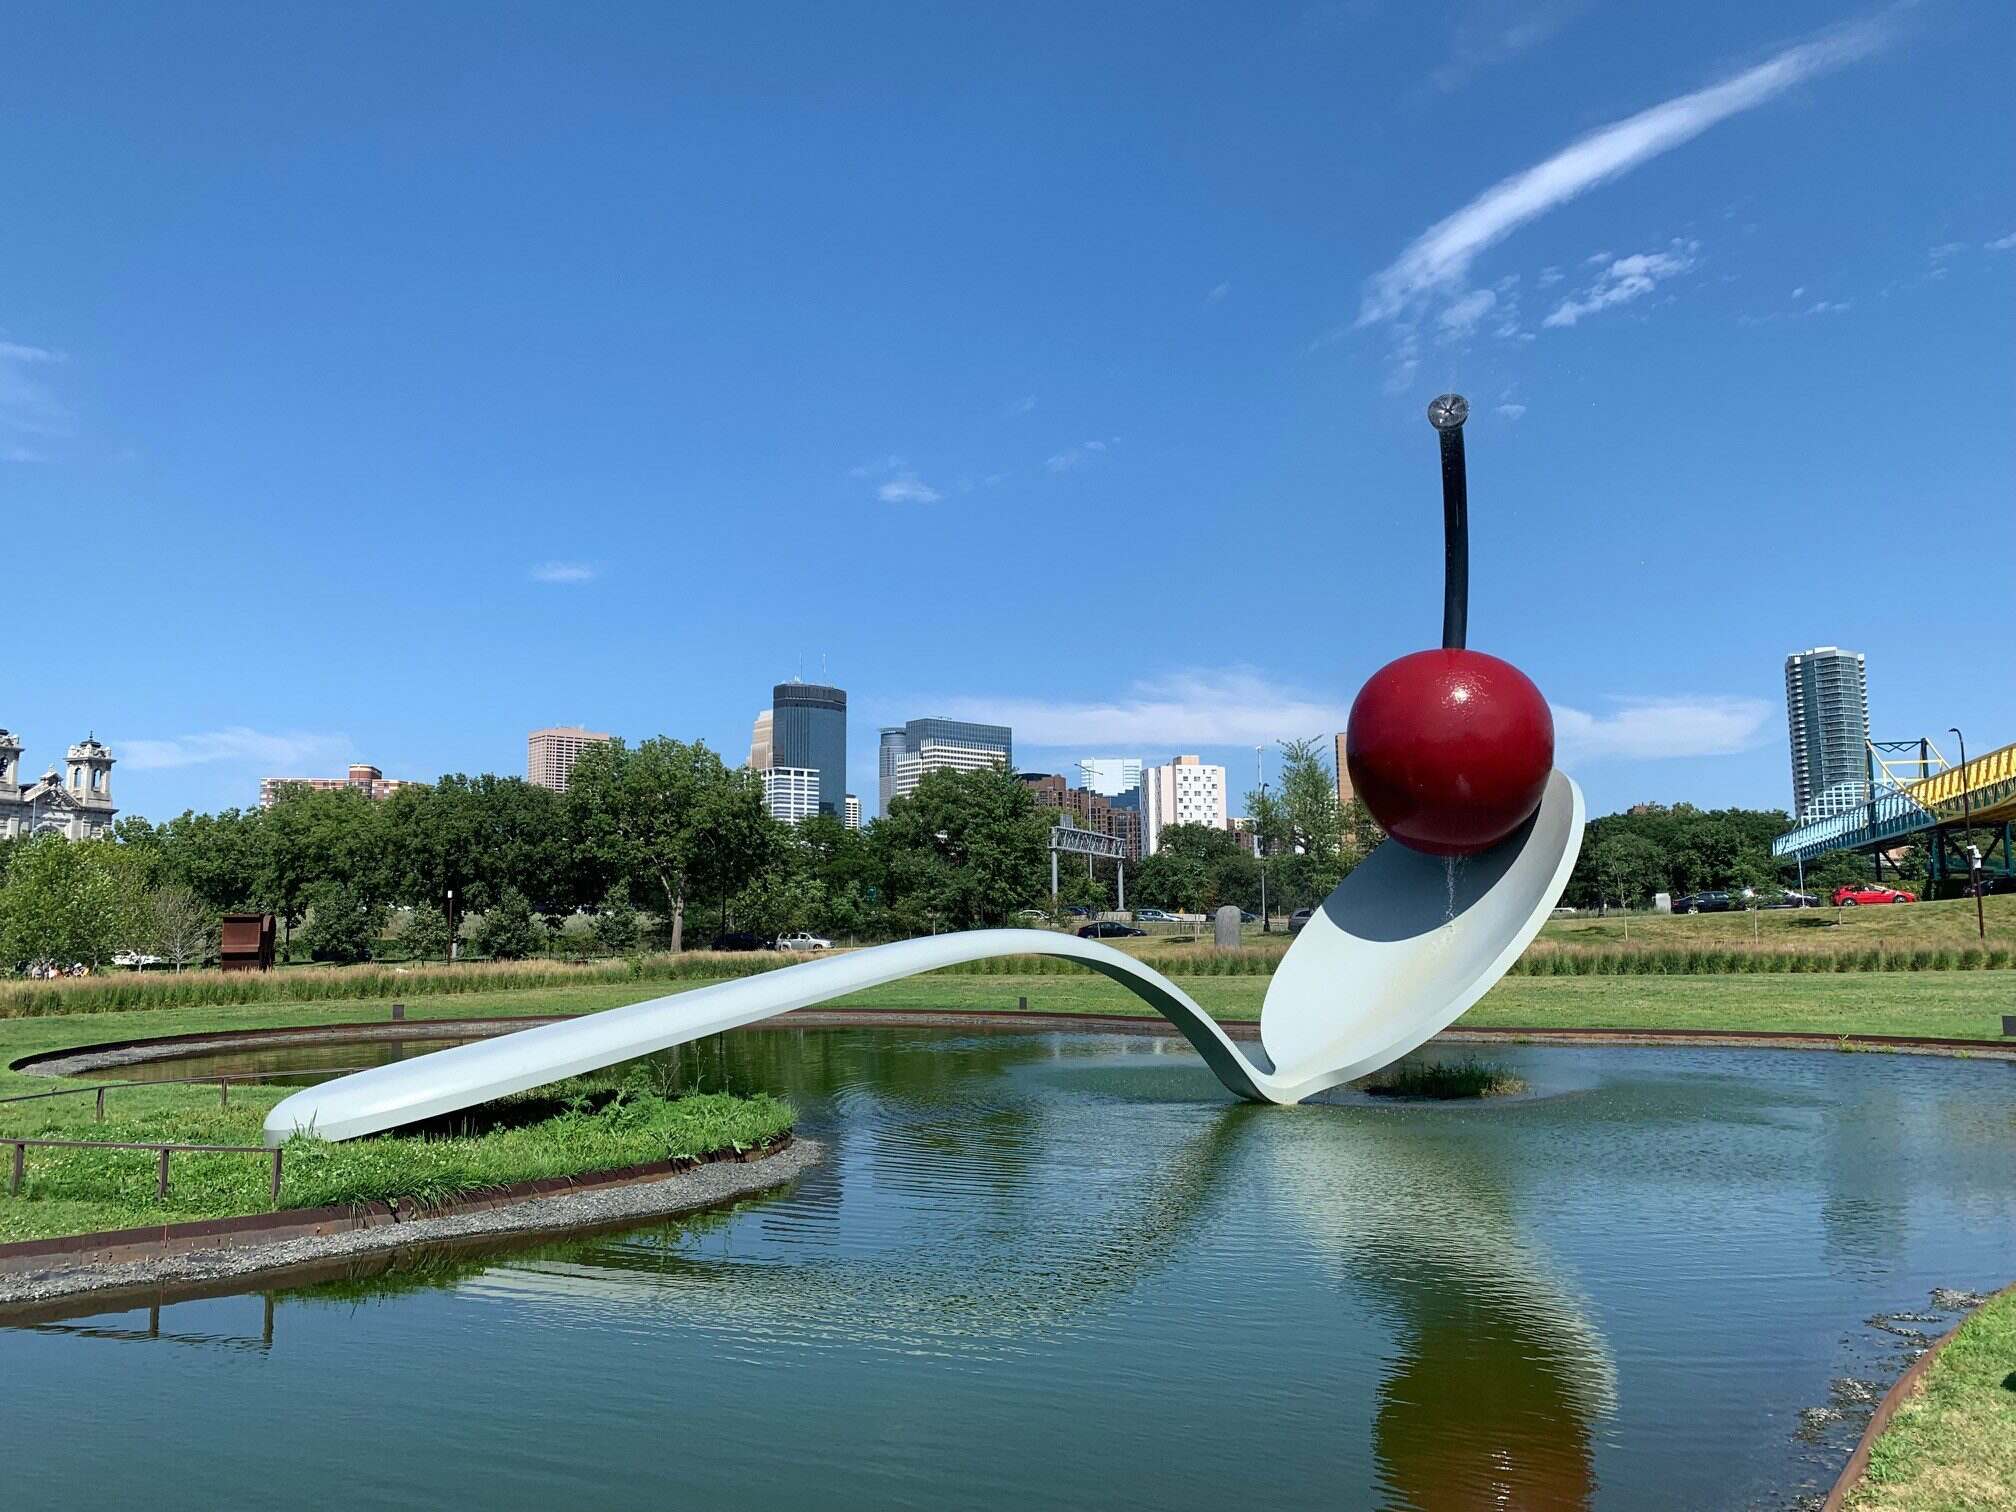 Which U.S. City Is Home To A Sculpture Called Spoonbridge And Cherry